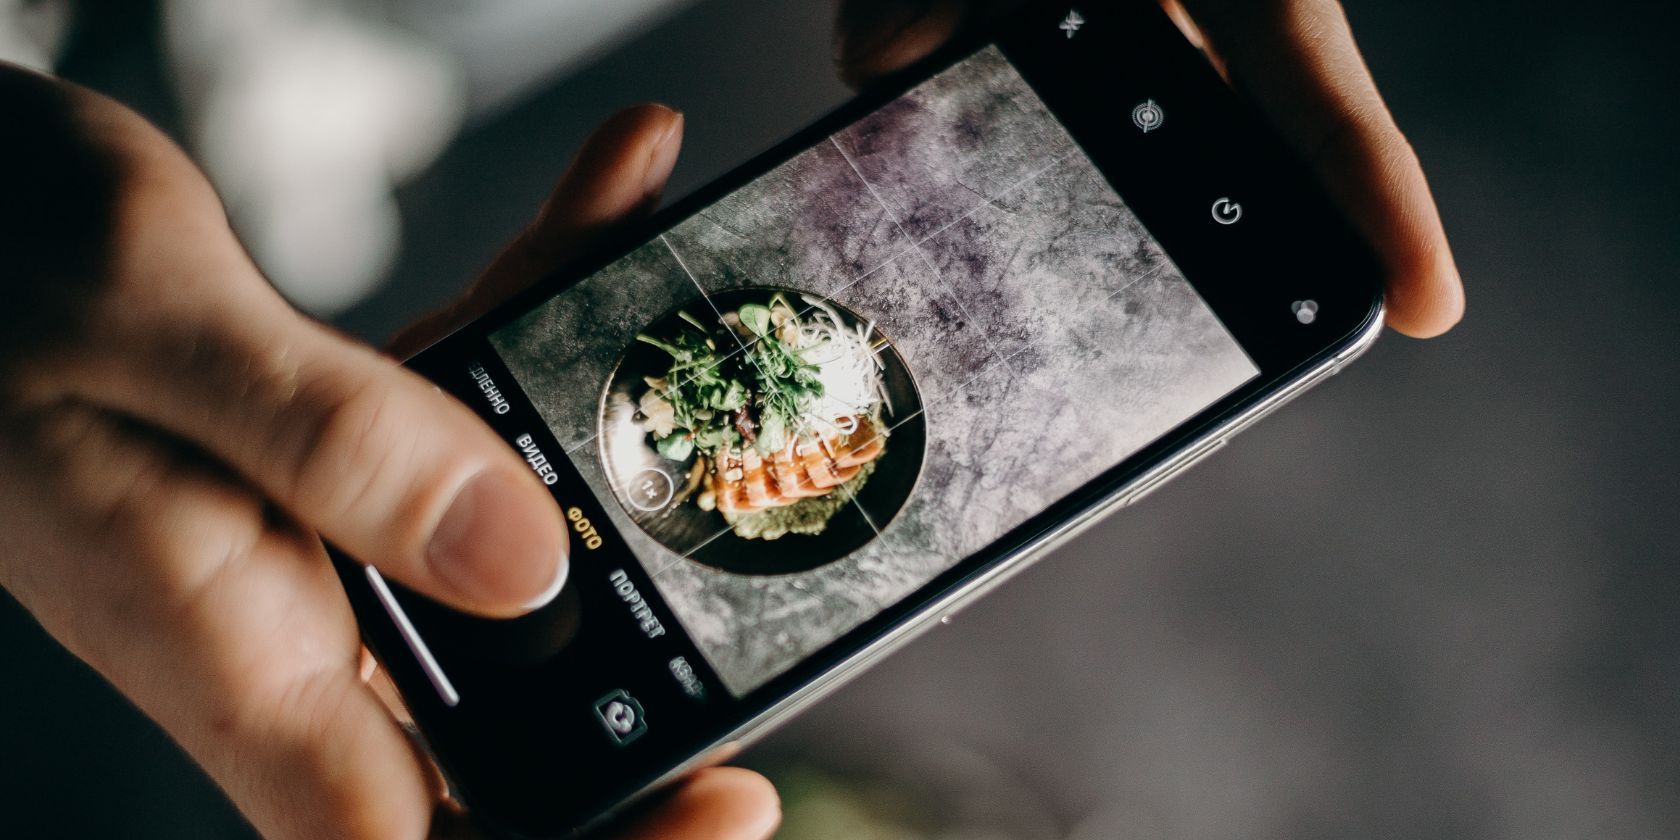 Person taking picture of food using an iPhone